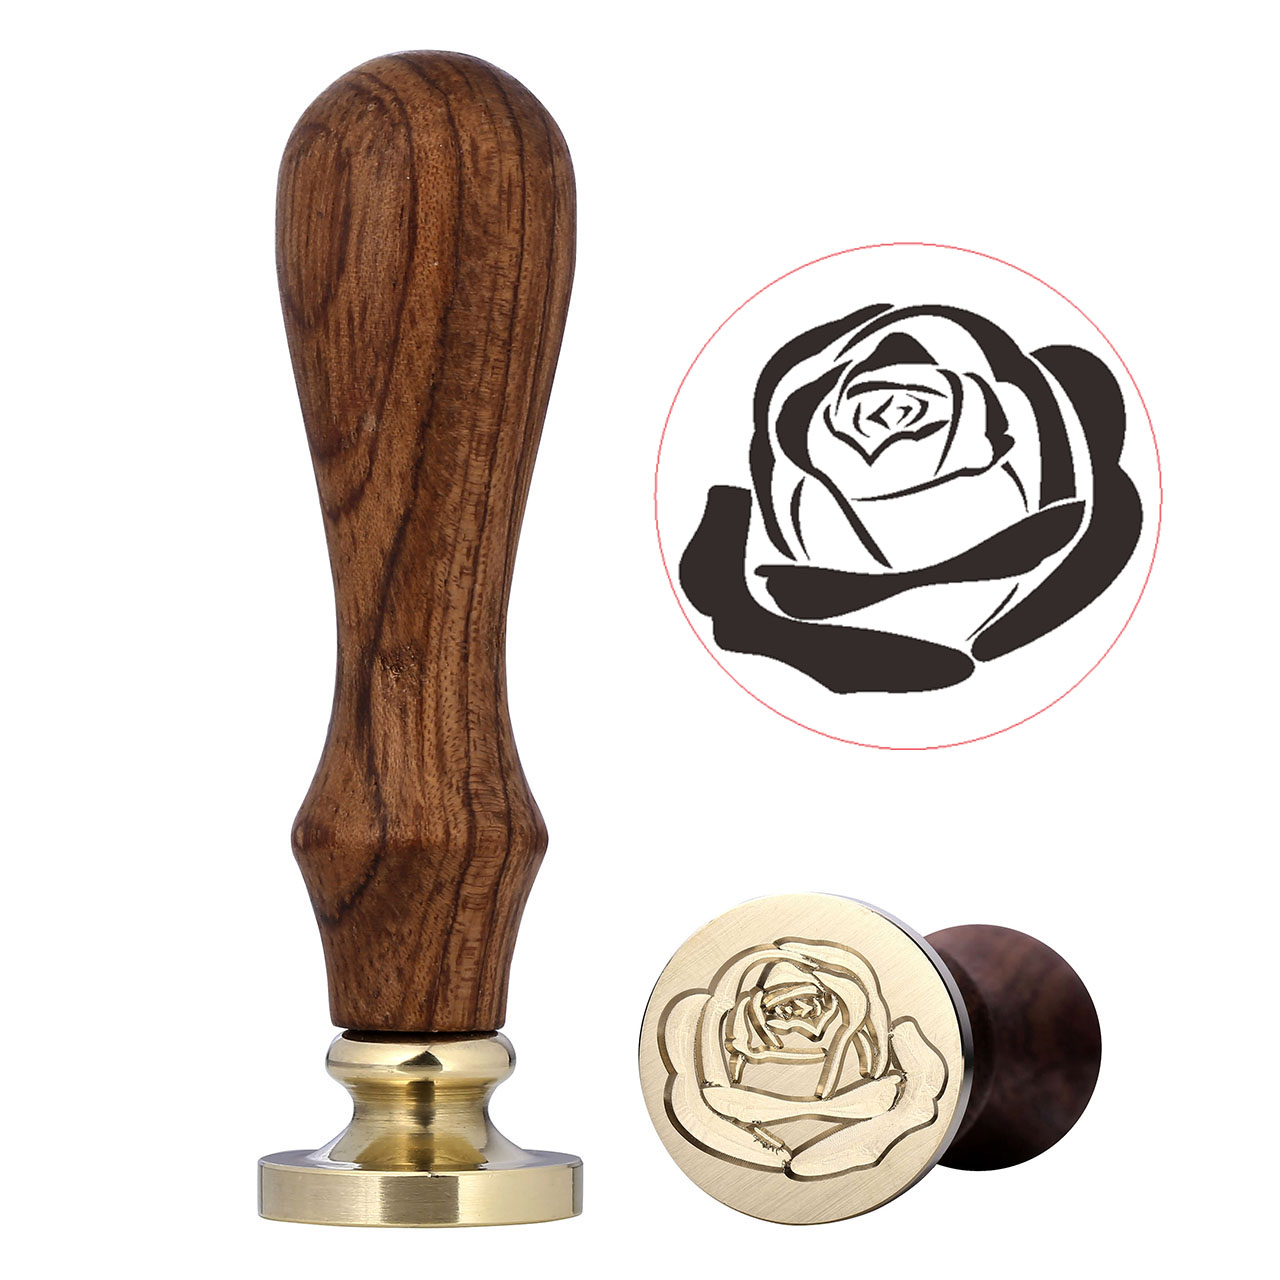 The Rose Wax Seal Stamp, Yoption Vintage Retro Romantic The Rose Sealing Wax Stamp, Great for Embellishment of Cards Envelopes, Invitations, Wine Packages, Ideal Gift (The Rose #2)